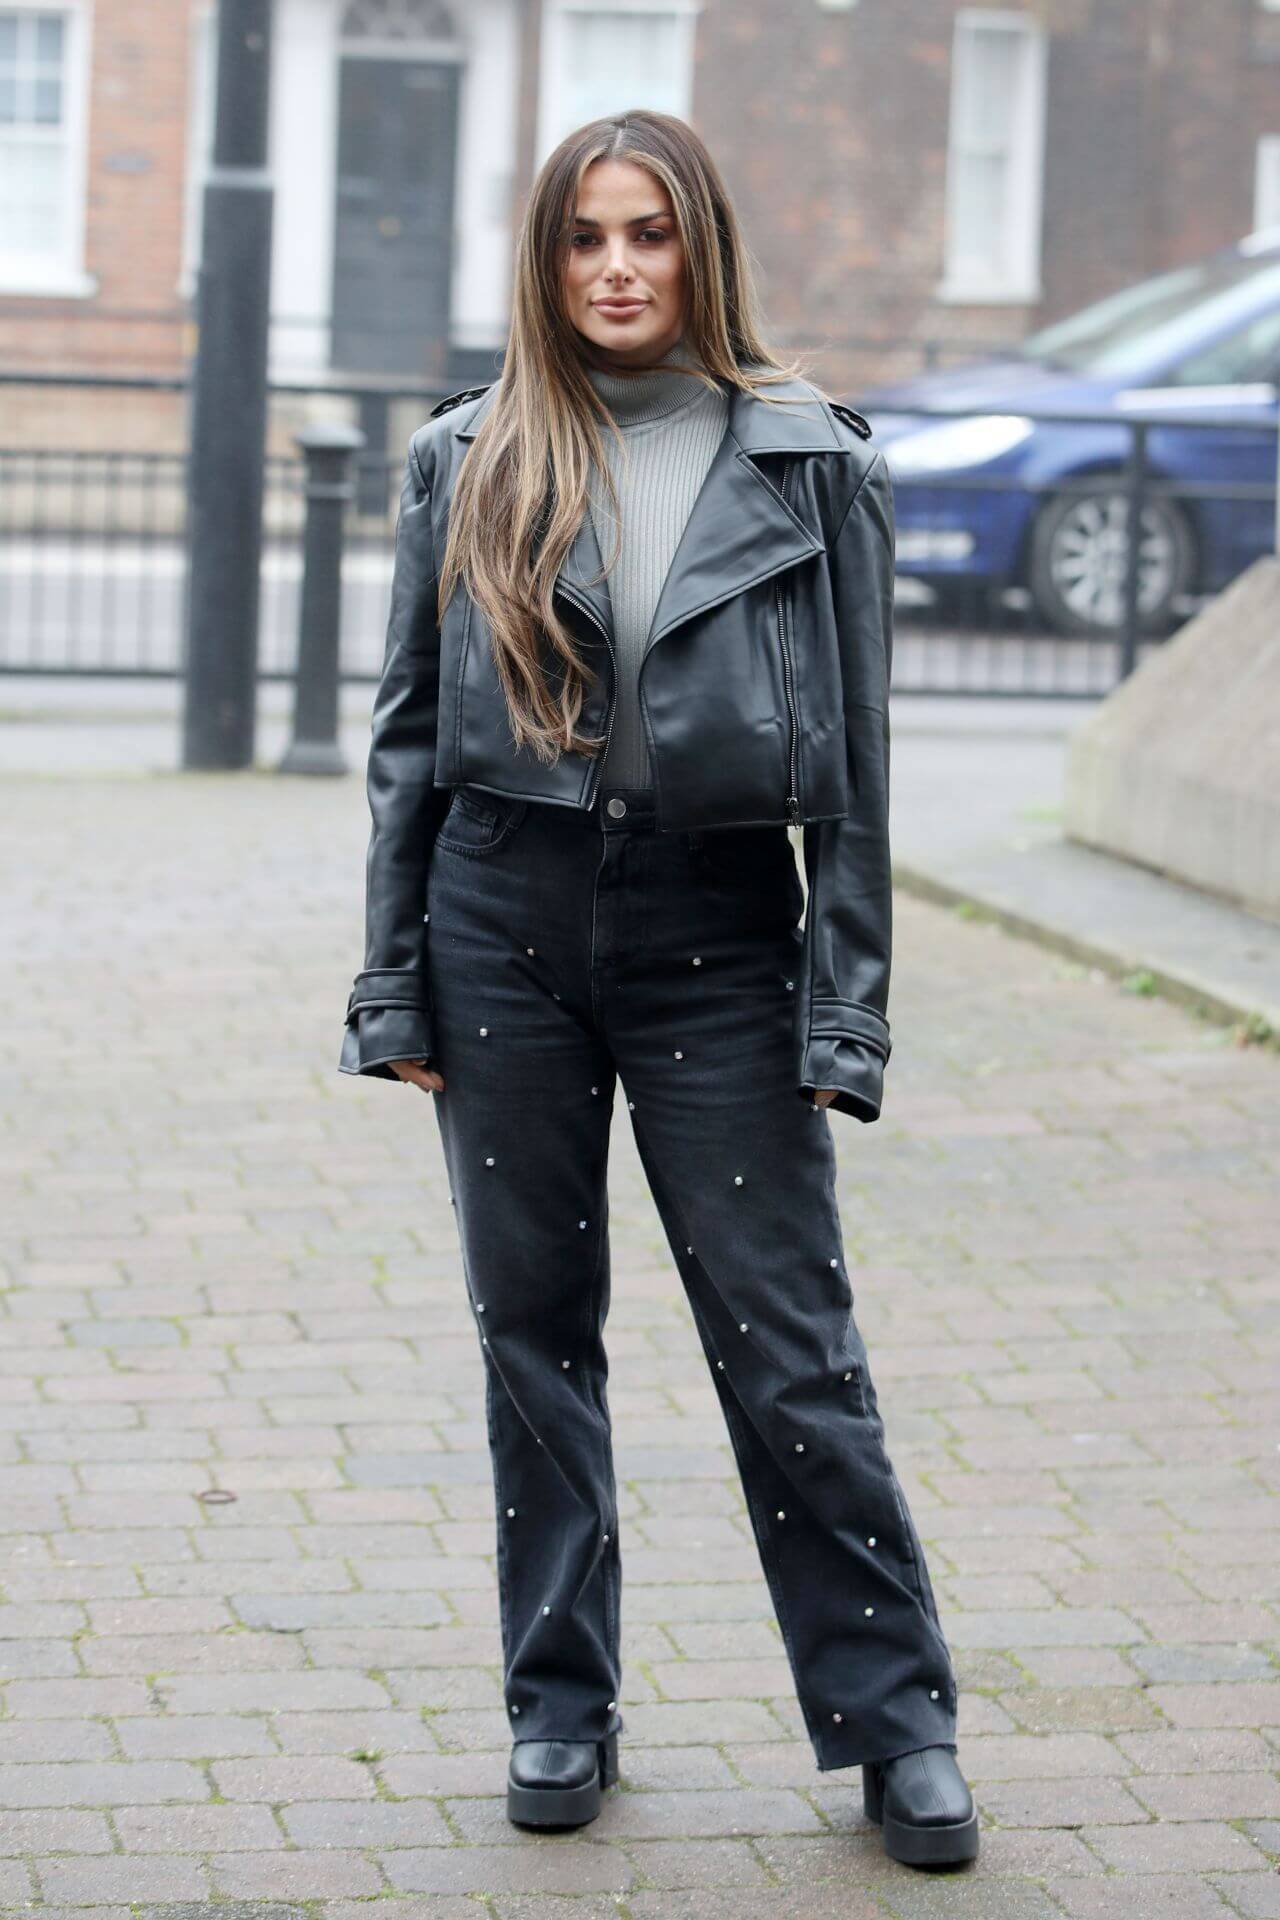 Courtney Green  In Grey Leather Jacket Under High Neck Top With Black Flare Pants At  Filming “TOWIE” in Essex